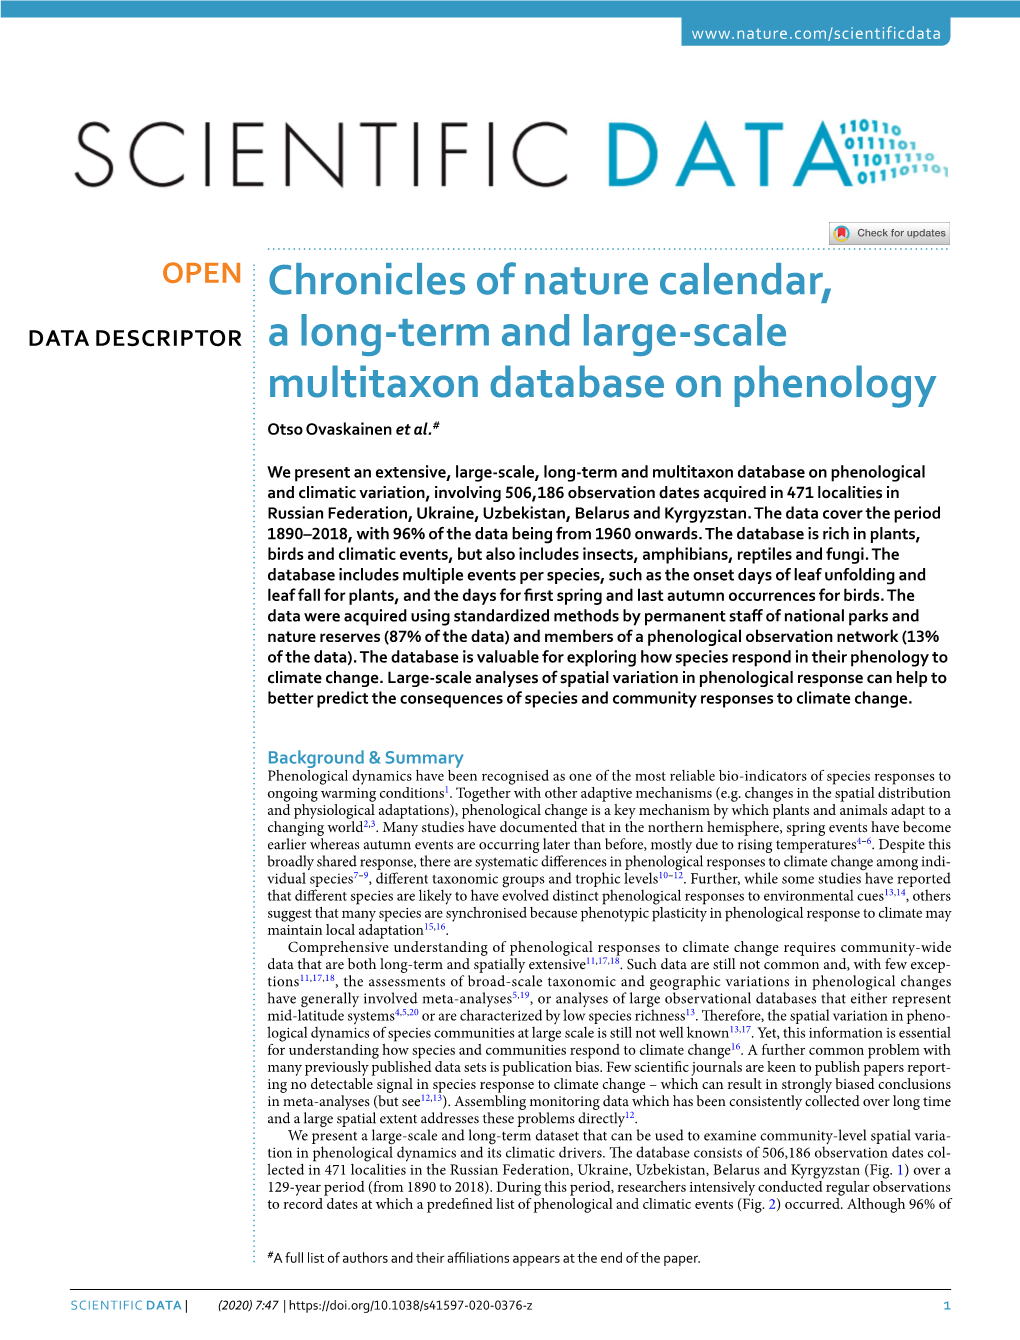 Chronicles of Nature Calendar, a Long-Term and Large-Scale Multitaxon Database on Phenology